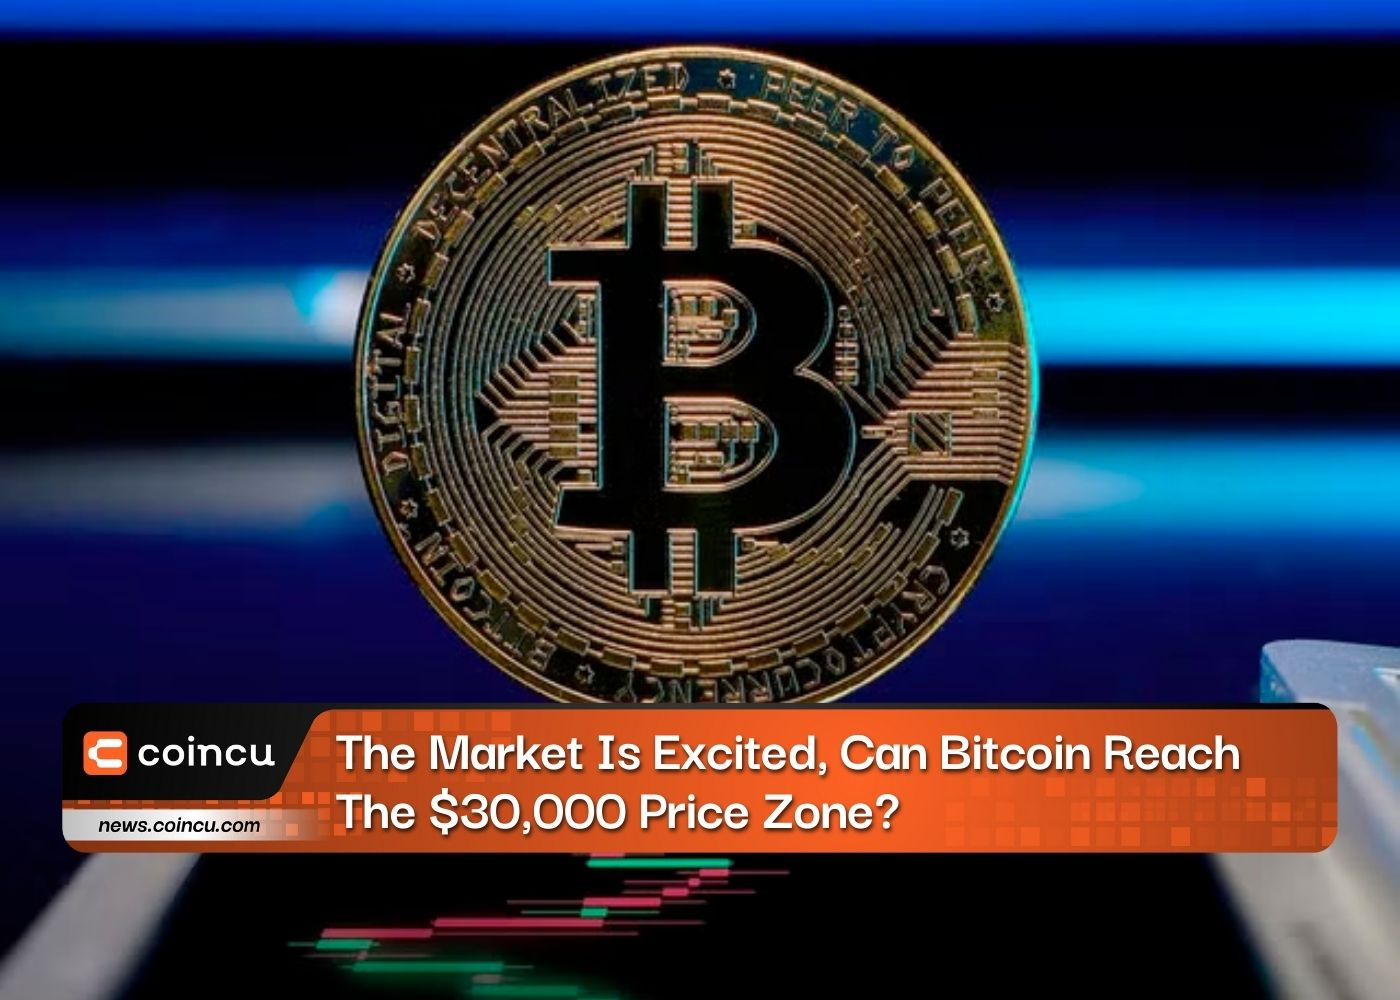 The Market Is Excited, Can Bitcoin Reach The $30,000 Price Zone?